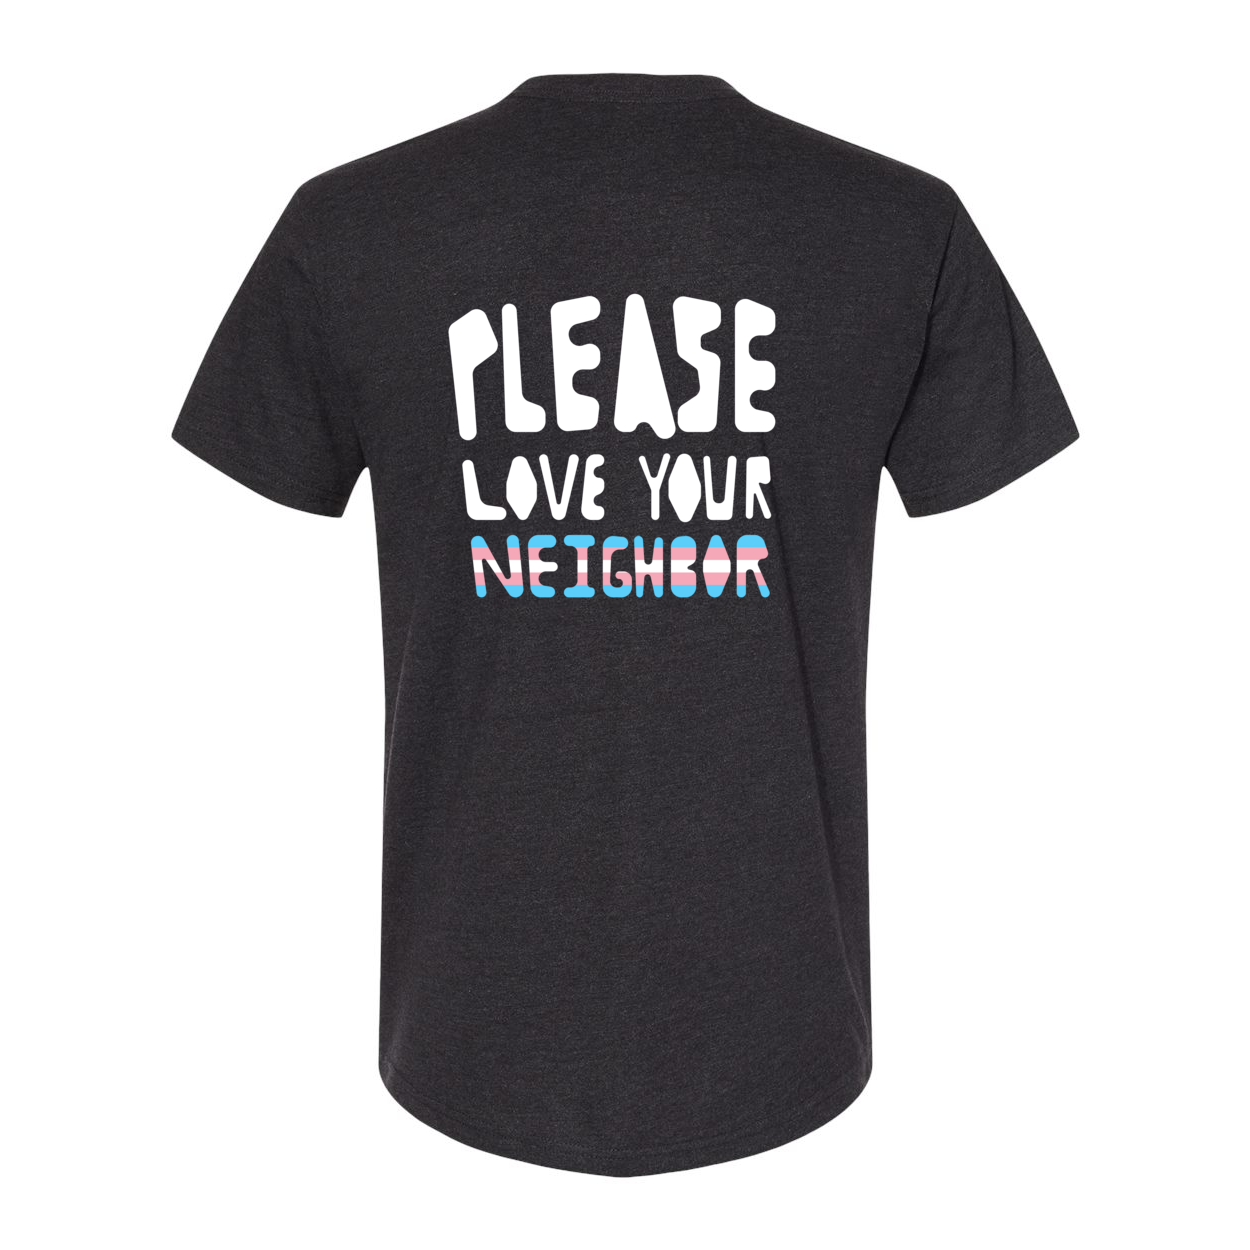 Words 'PLEASE LOVE YOUR NEIGHBOR' in white and trans pride flag on back of black shirt .